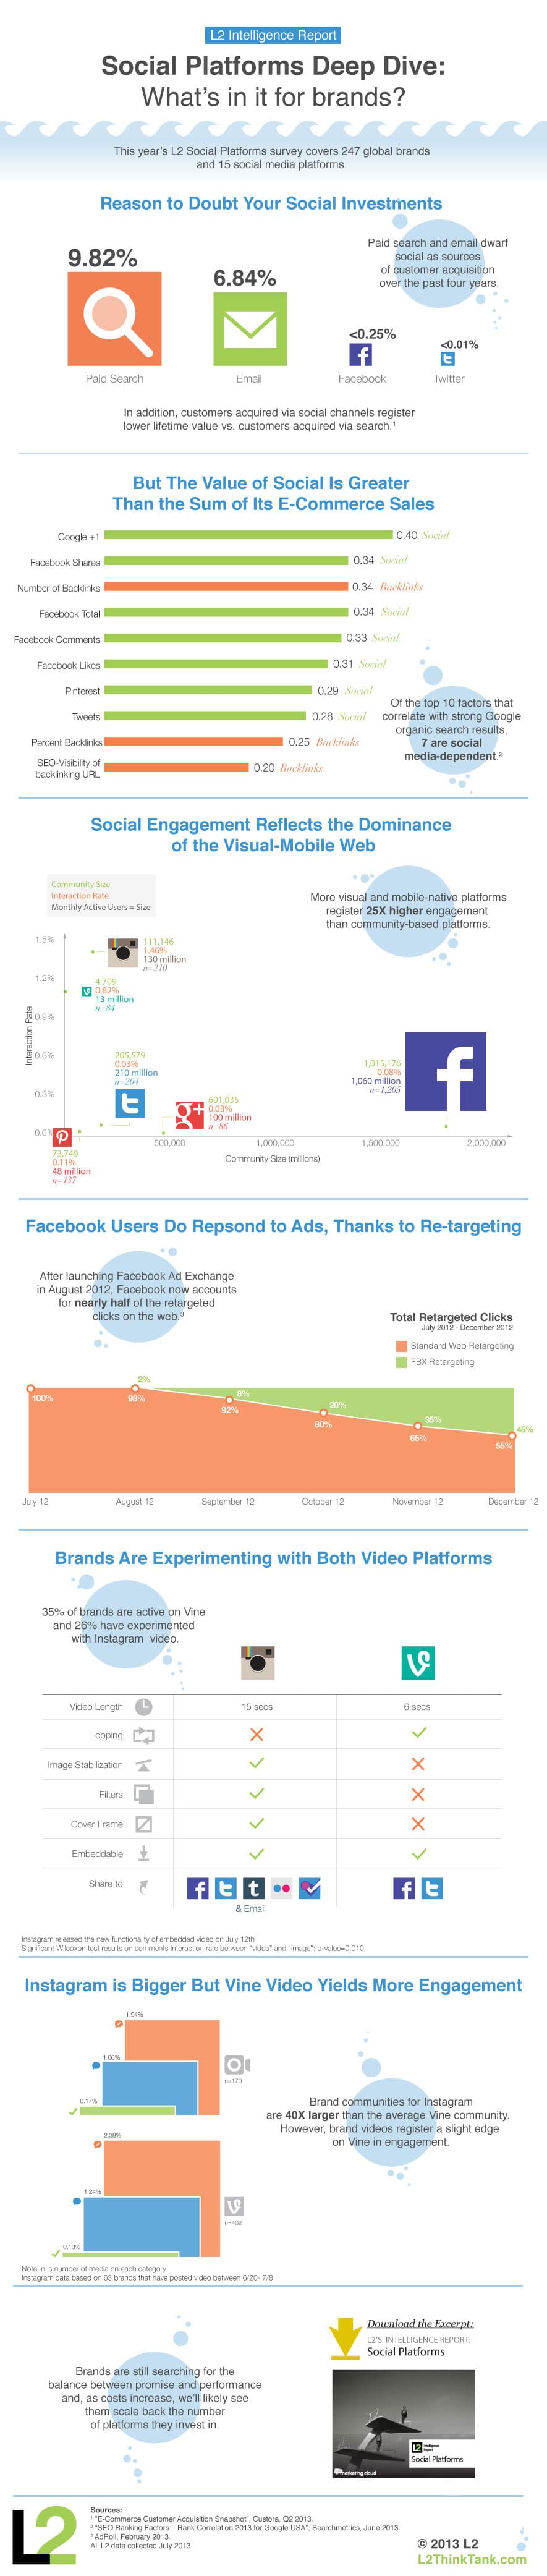 Social Media For Brands: Is It A Good Time Investment? [Infographic]